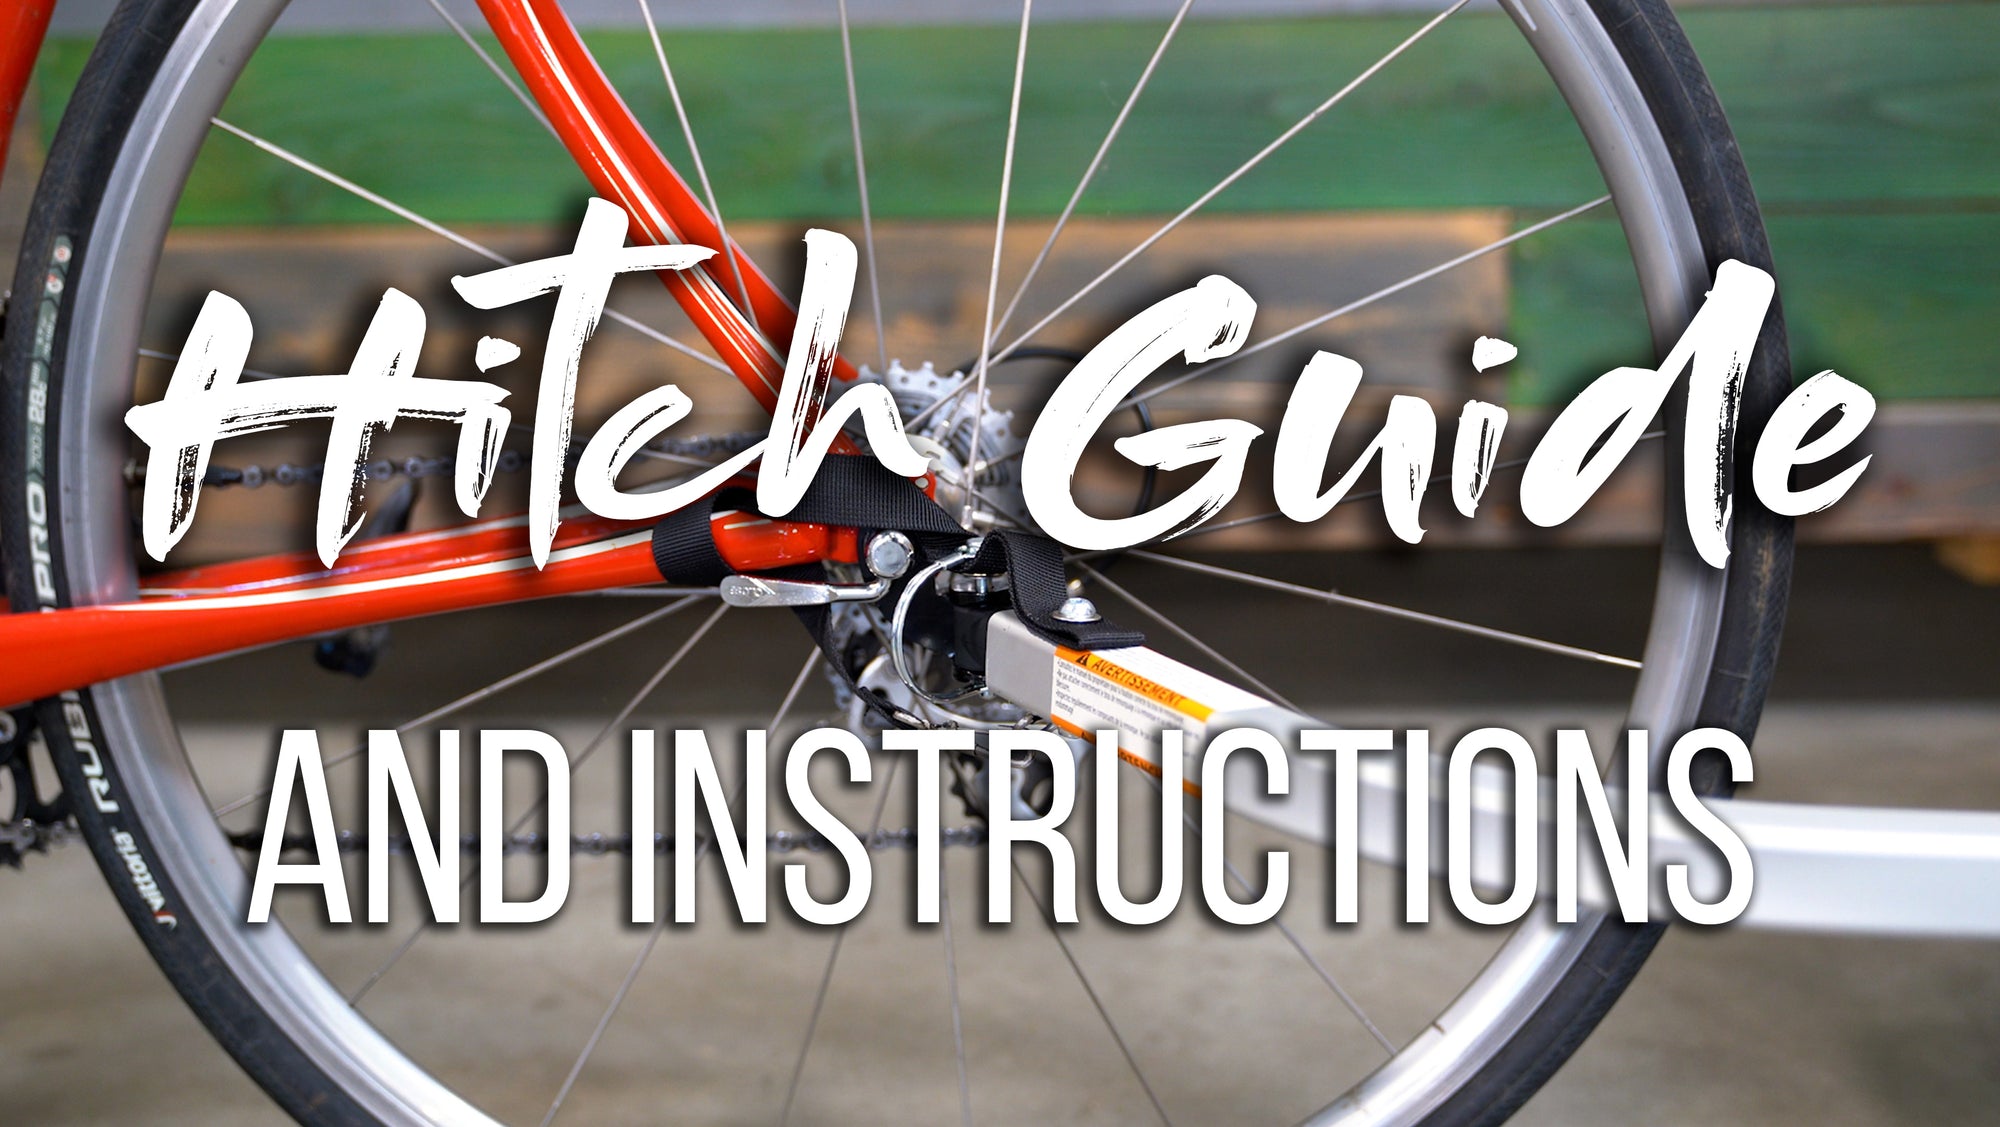 Steel Hitch Guide and Instructions